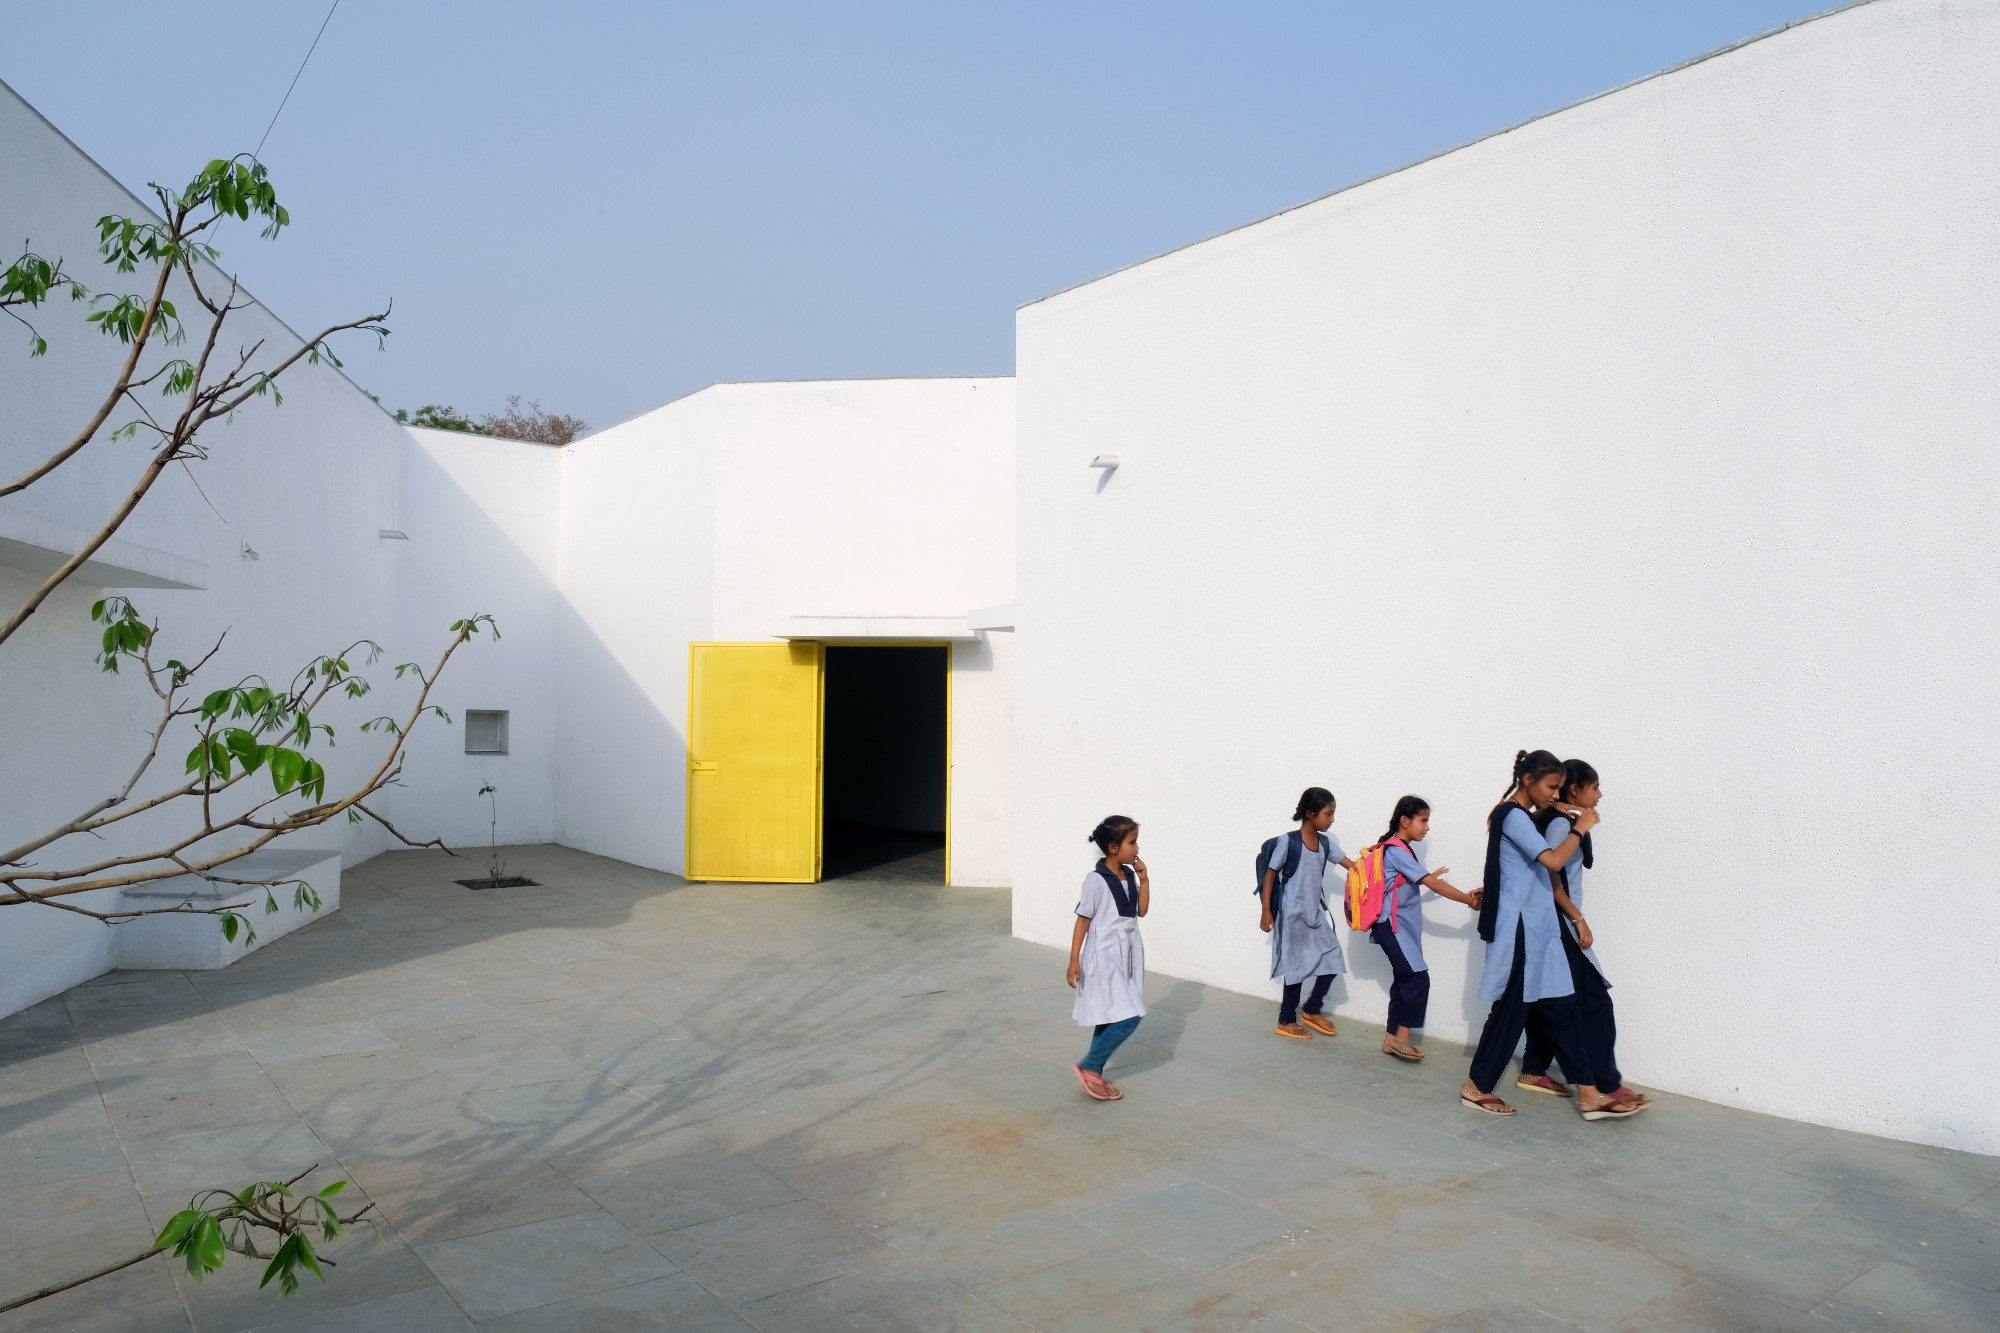 School for the Blind -designed by SEALAB